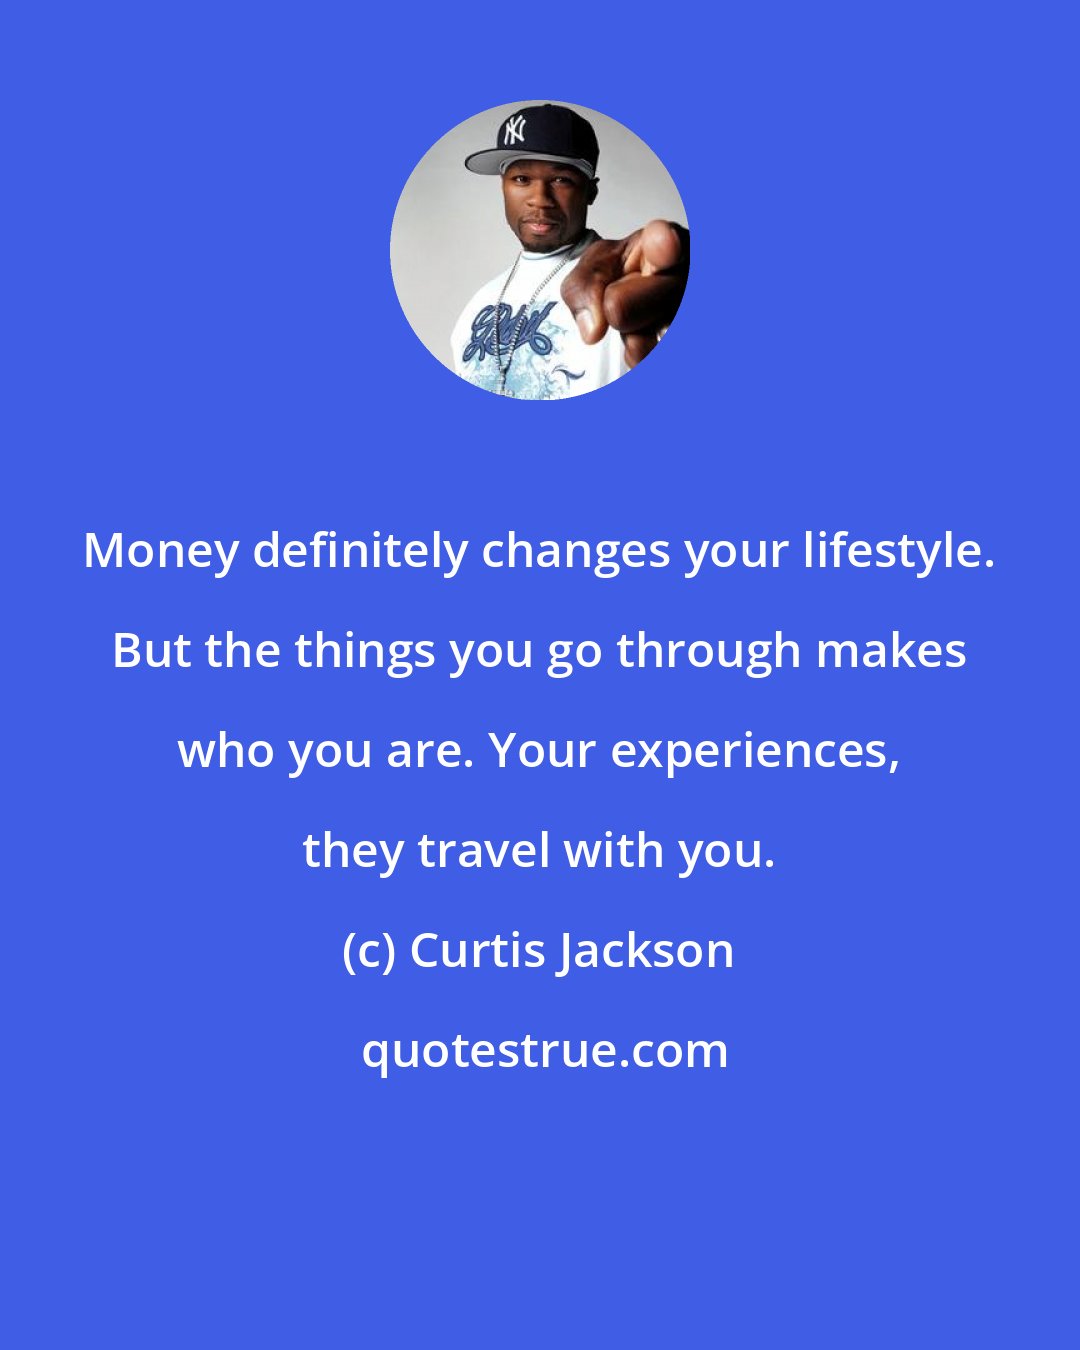 Curtis Jackson: Money definitely changes your lifestyle. But the things you go through makes who you are. Your experiences, they travel with you.